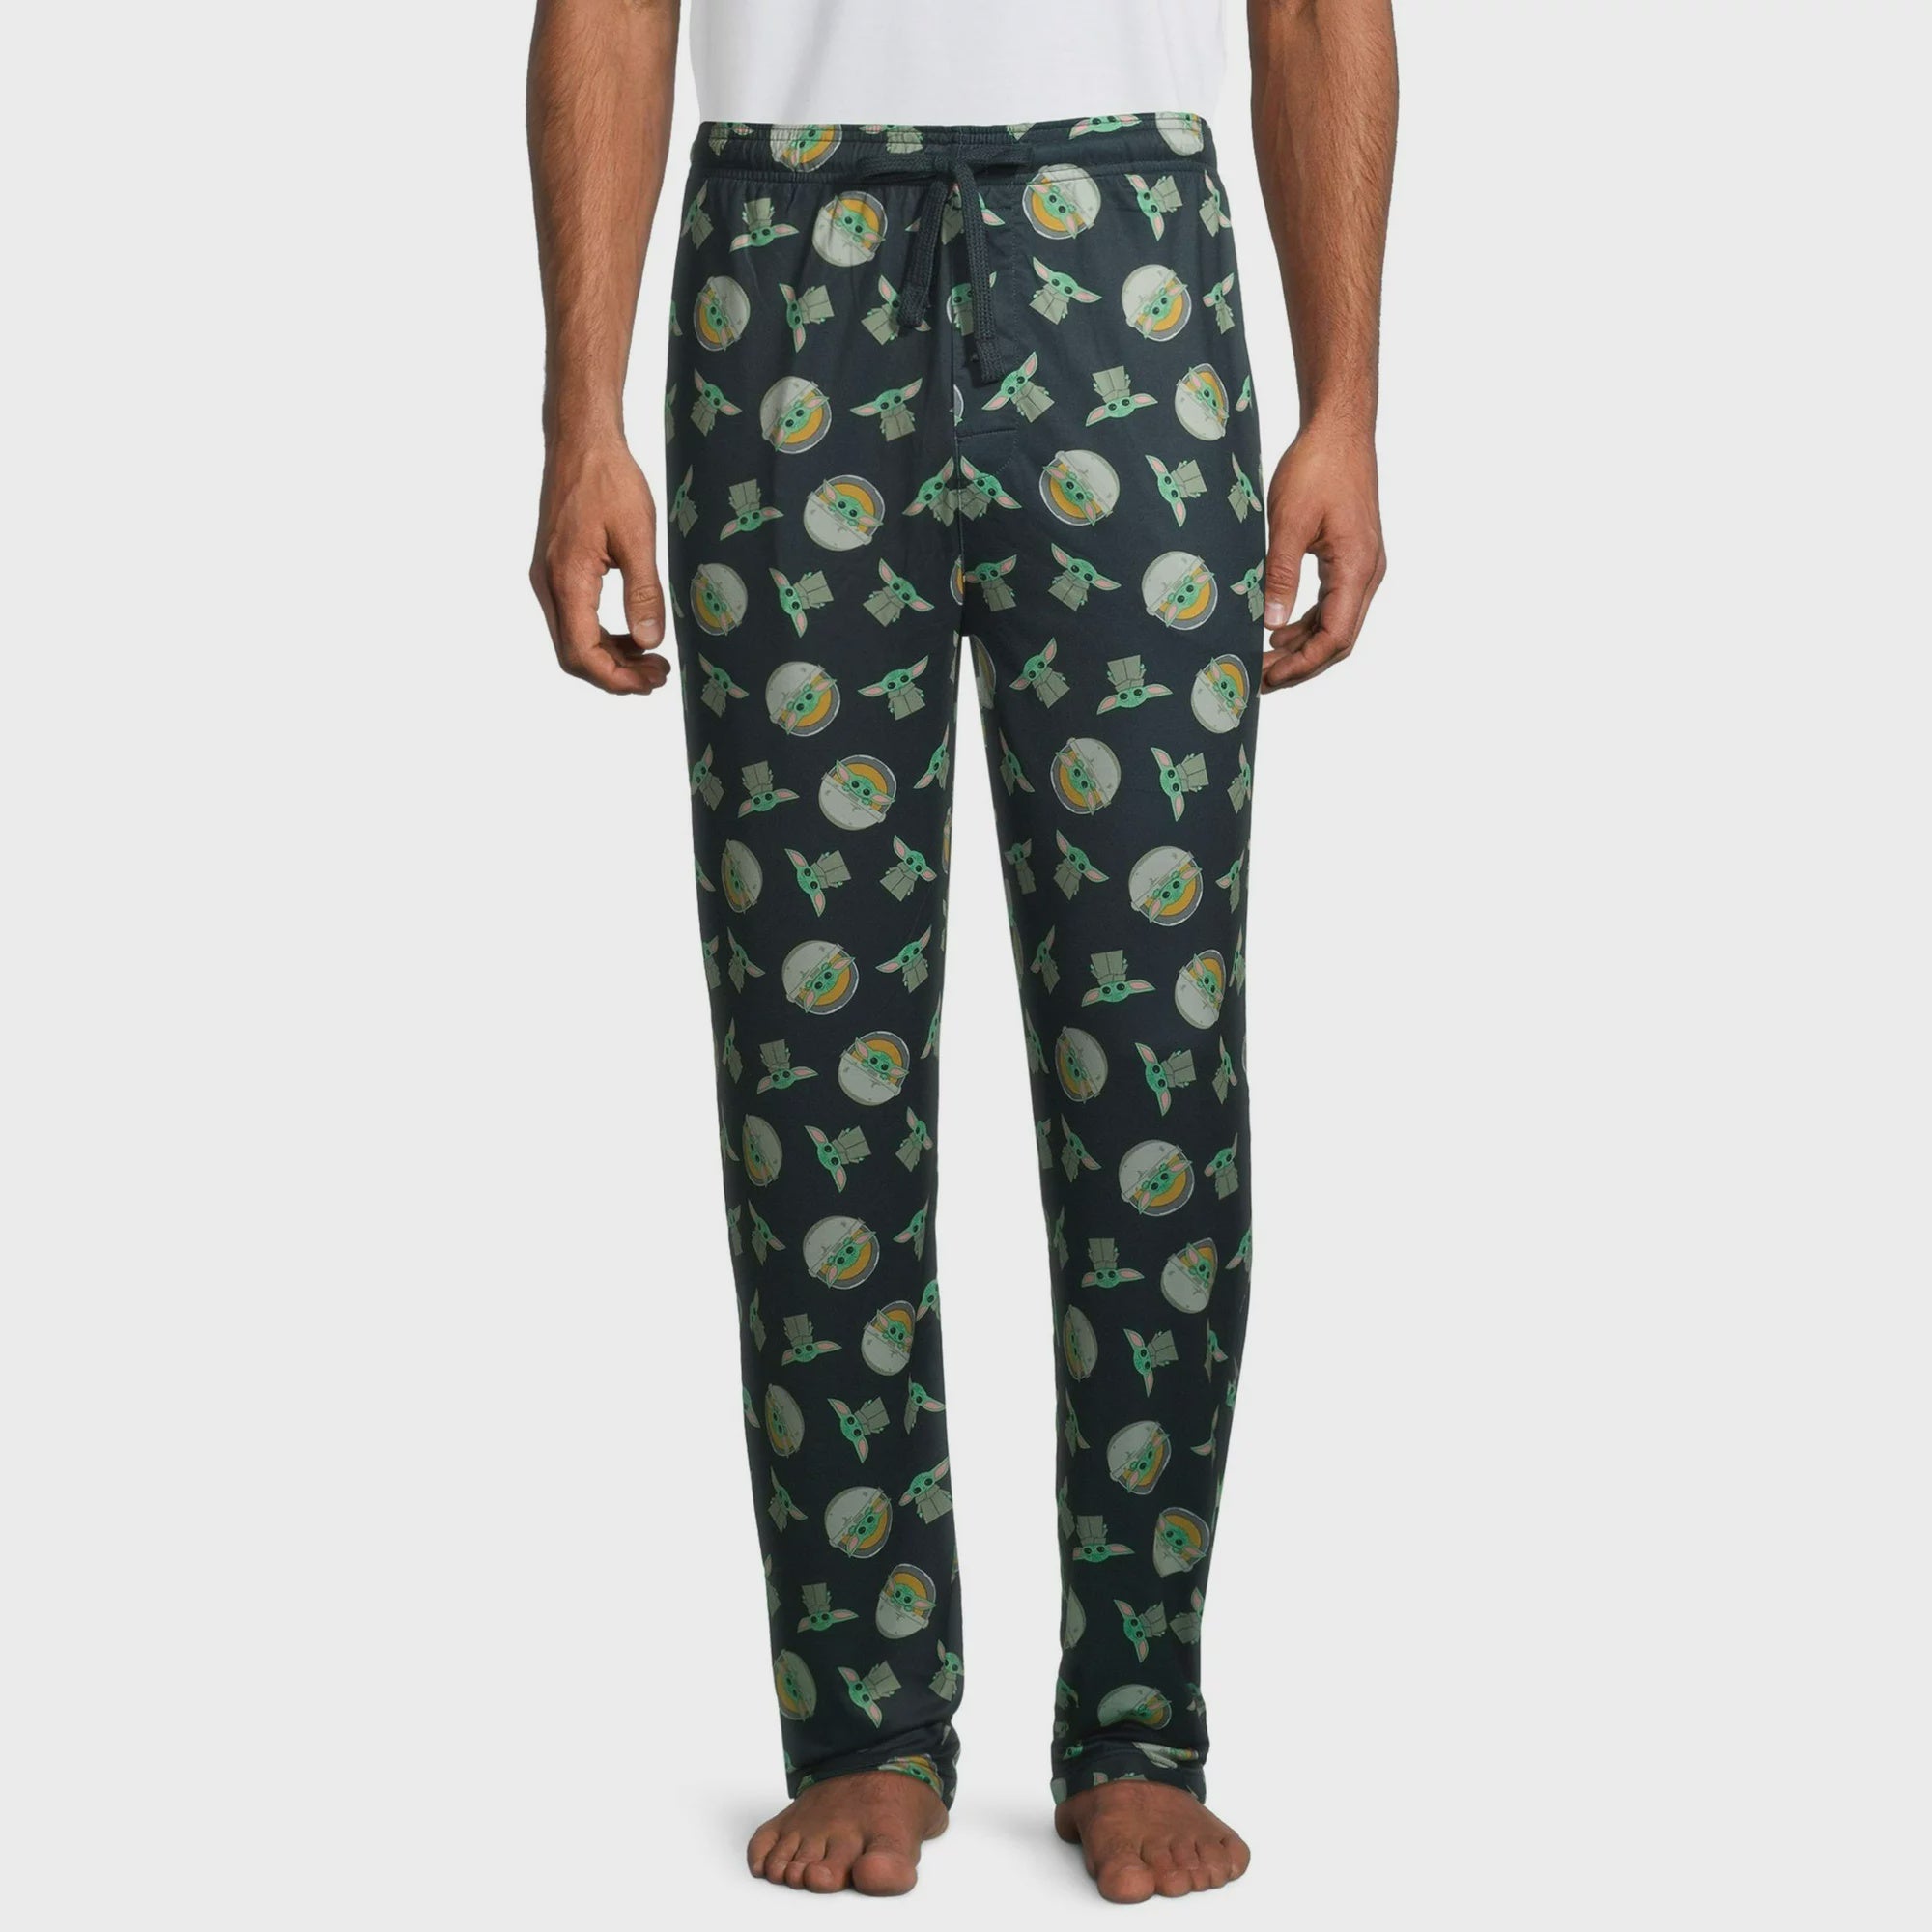 Star Wars The Mandalorian The Child All Over Print Pajama Pants LARGE